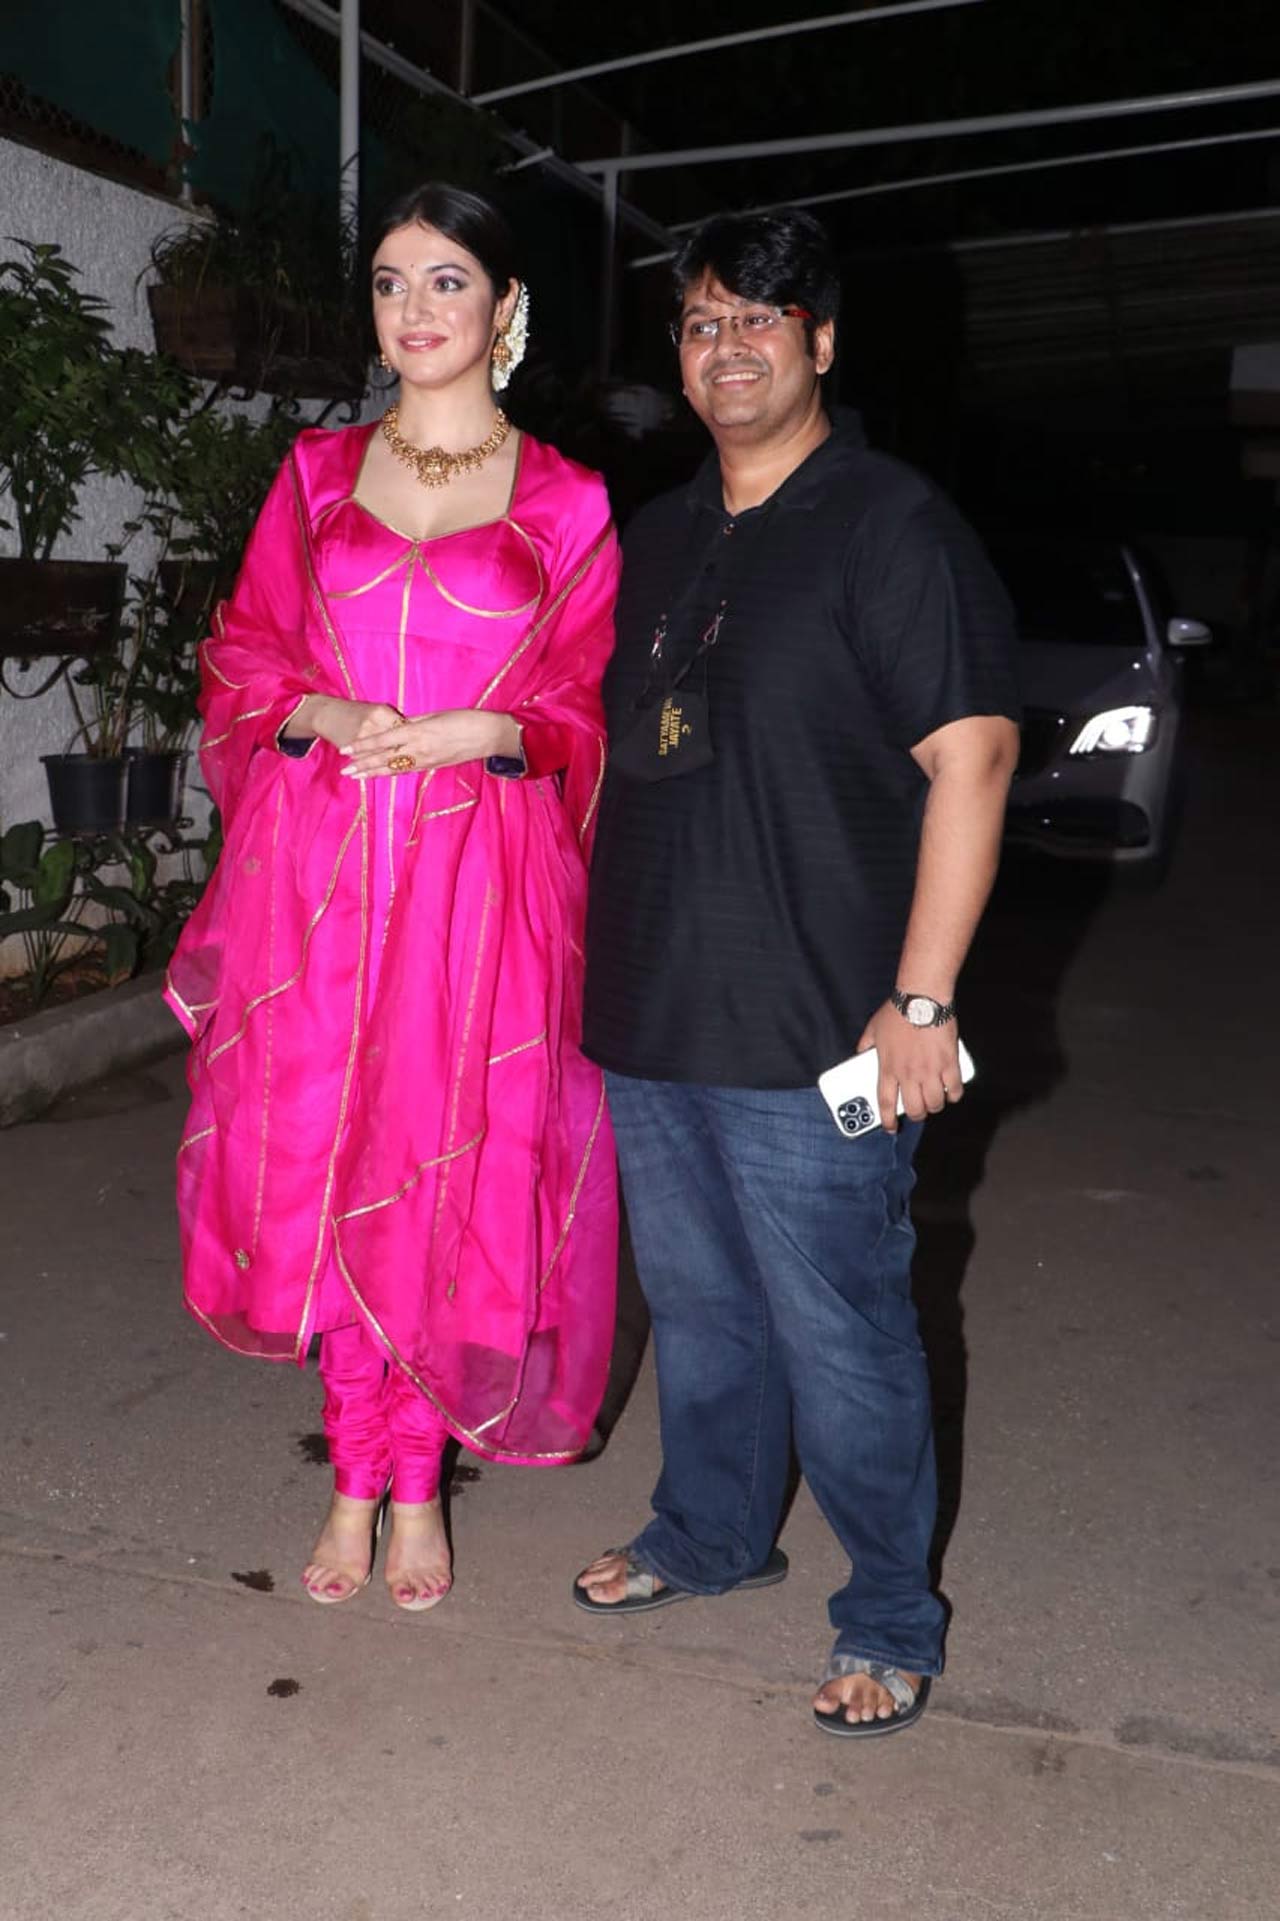 Divya Khosla Kumar posed with the director of the film Milap Zaveri. The actress is all set to share screen space with John Abraham for the very first time. Divya's Fuschia pink Anarkali outfit has been loved by a lot of fashionistas on social media. What do you guys think?